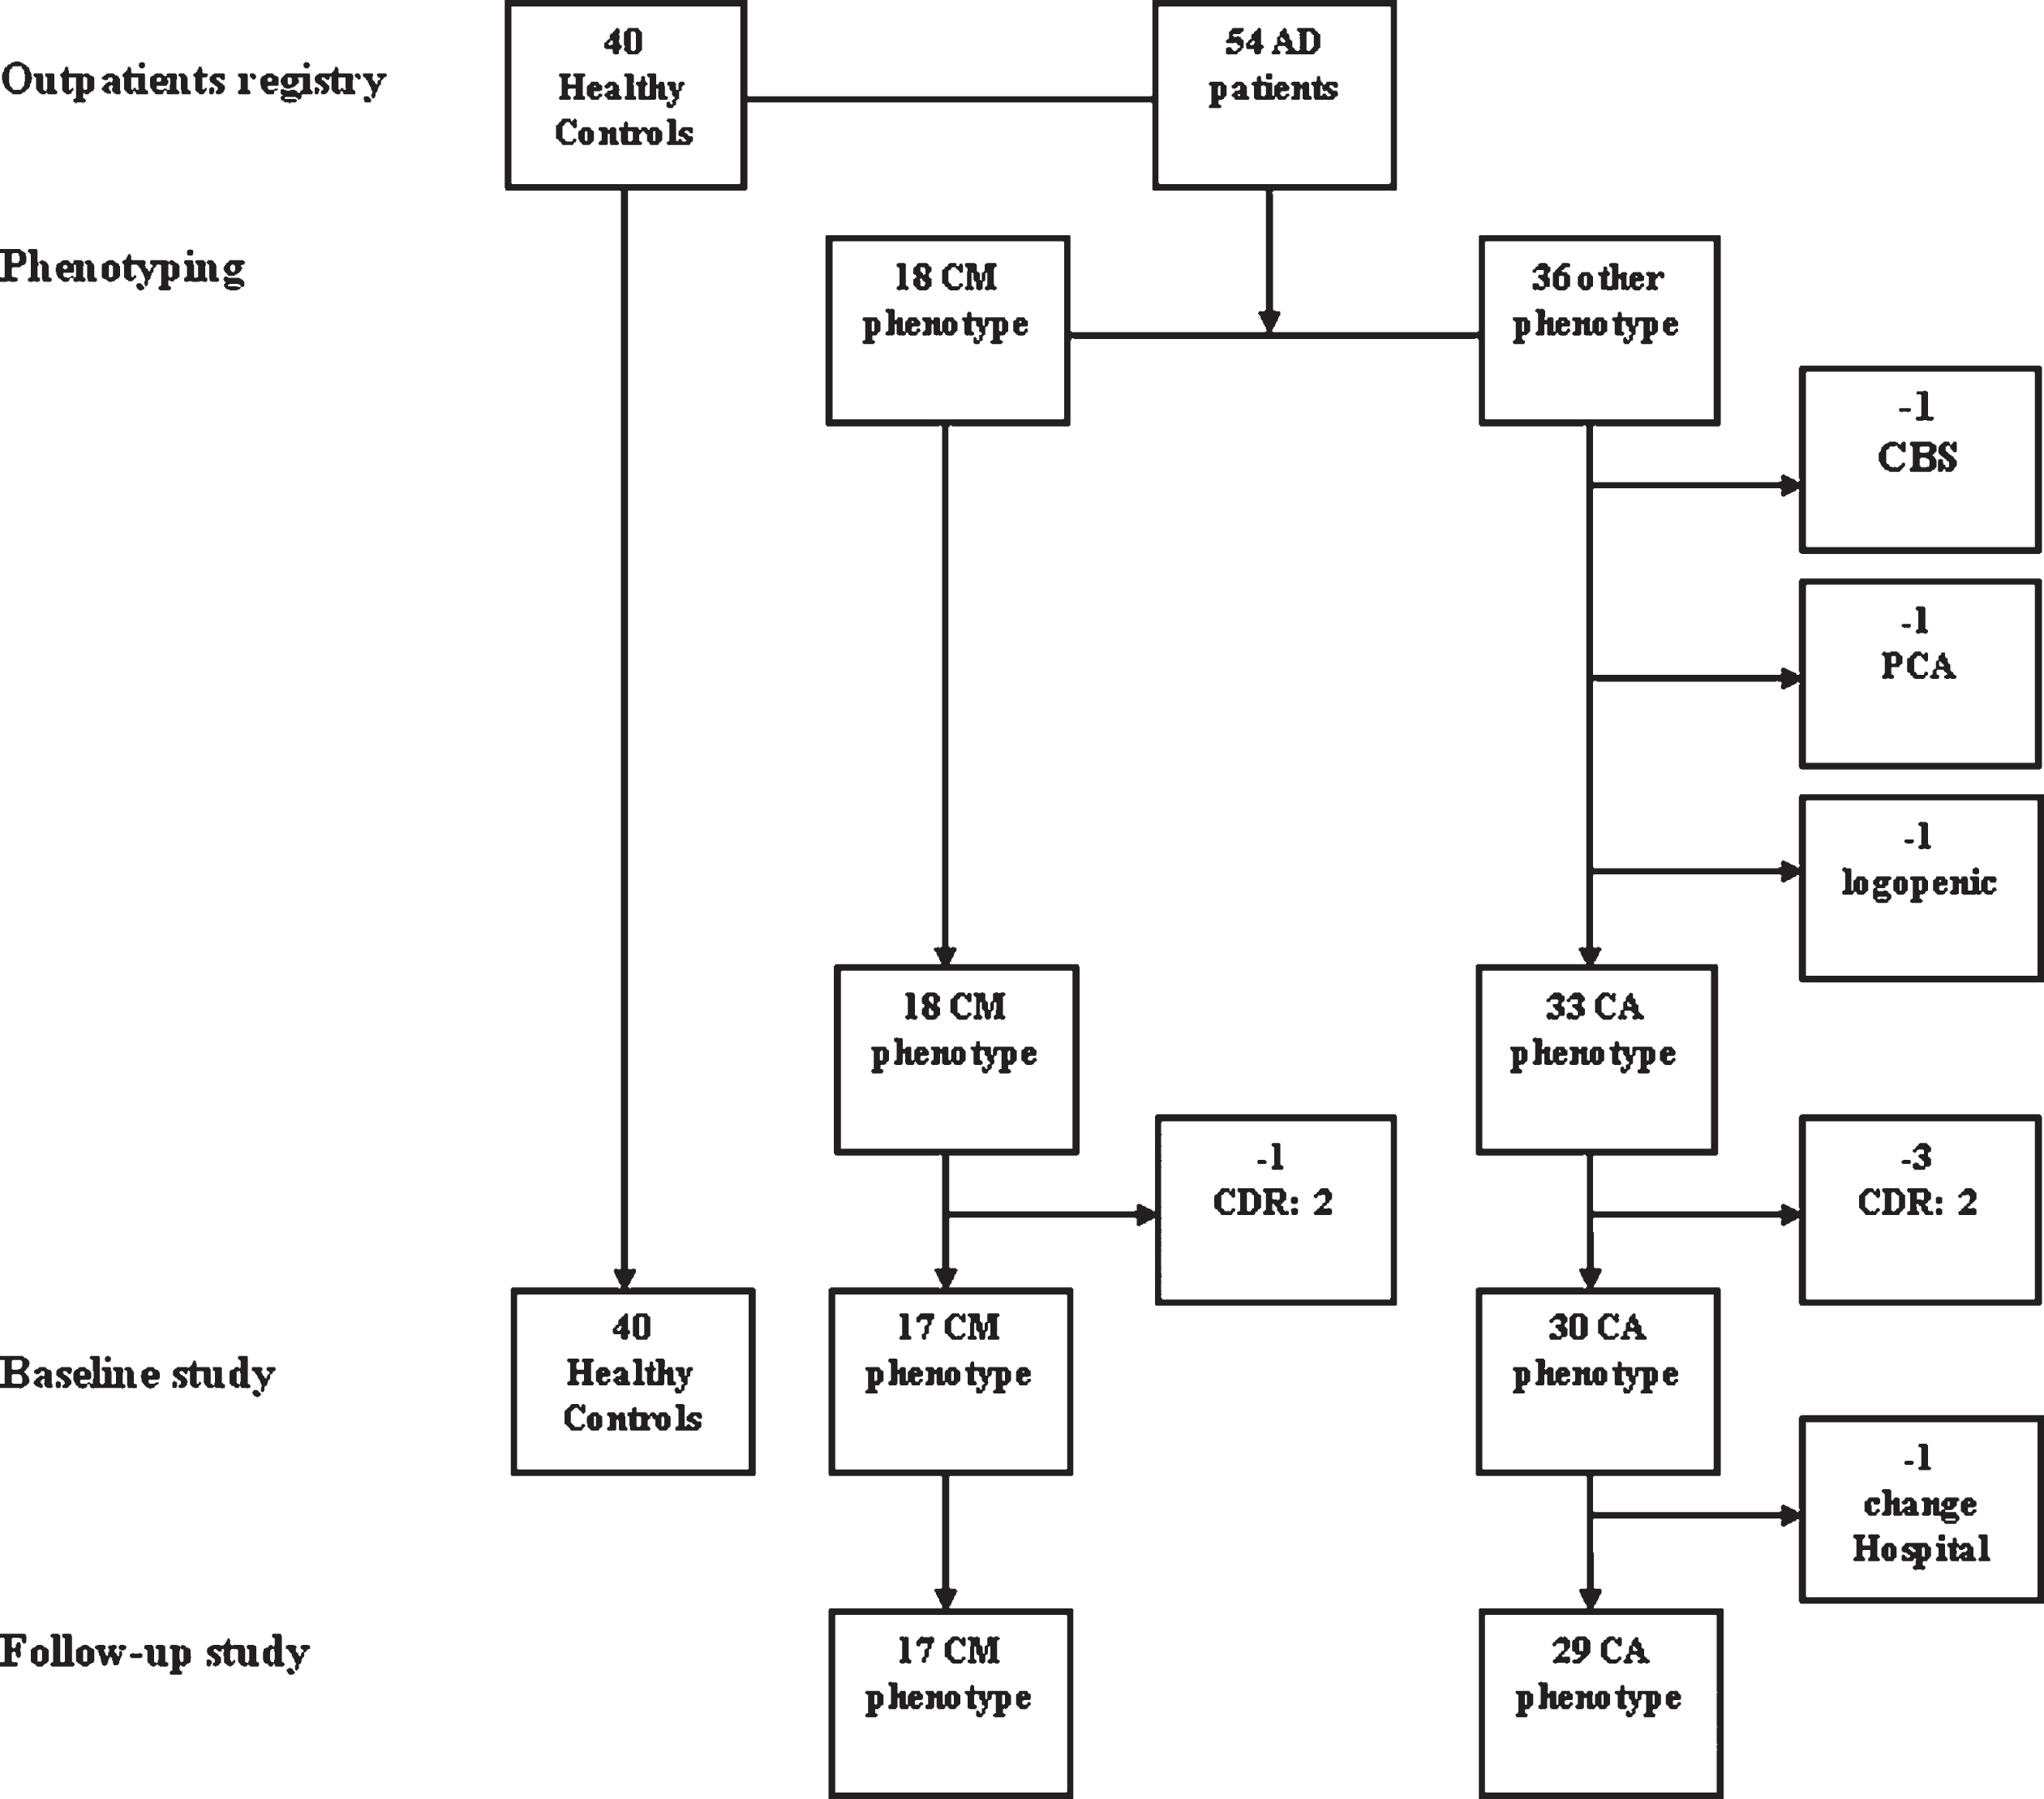 Flow-chart of the study sample. We first identified 18 outpatients presenting with a possible confabulation-misidentification phenotype (CM-phenotype) among the patients with AD diagnosis supported by positive biomarkers in the CSF visited in a ten-year period at the Geriatric Unit of the Ca’ Granda Foundation hospital. Then, we excluded one CM-AD patient from this group because she was at moderate stage of dementia (CDR: 2) when she came to our first observation. At the same time, we first selected 33 outpatients presenting with a classical amnesic phenotype (CA-phenotype) among the 36 outpatients with AD diagnosis supported by positive biomarkers in CSF remaining in the outpatient registry in the same period after the extraction of the 18 CM-AD patients. Instead, 3 patients were excluded because presenting an atypical phenotype of AD (i.e., corticobasal syndrome, PCA syndrome, logopenic aphasia). Then, we excluded 3 CA-ADs because they were at advanced stage of dementia (all CDR: 2) at the time of the first visit. In total, 17 CM-ADs and 30 CA-ADs, all at early dementia stage (CDR 0.5 or 1), participated in the cross-sectional study at the time of the baseline assessment. Instead, 17 CM-ADs and 29 CA-ADs participated in the longitudinal study, due to the fact that one CA-AD patient underwent follow-up visits into a different hospital. Finally, we selected 40 people taken from the general outpatient registry in the same Unit among those patients resulted cognitively unimpaired after the neuropsychological assessment, who served as healthy controls (HC) group in the first baseline assessment.